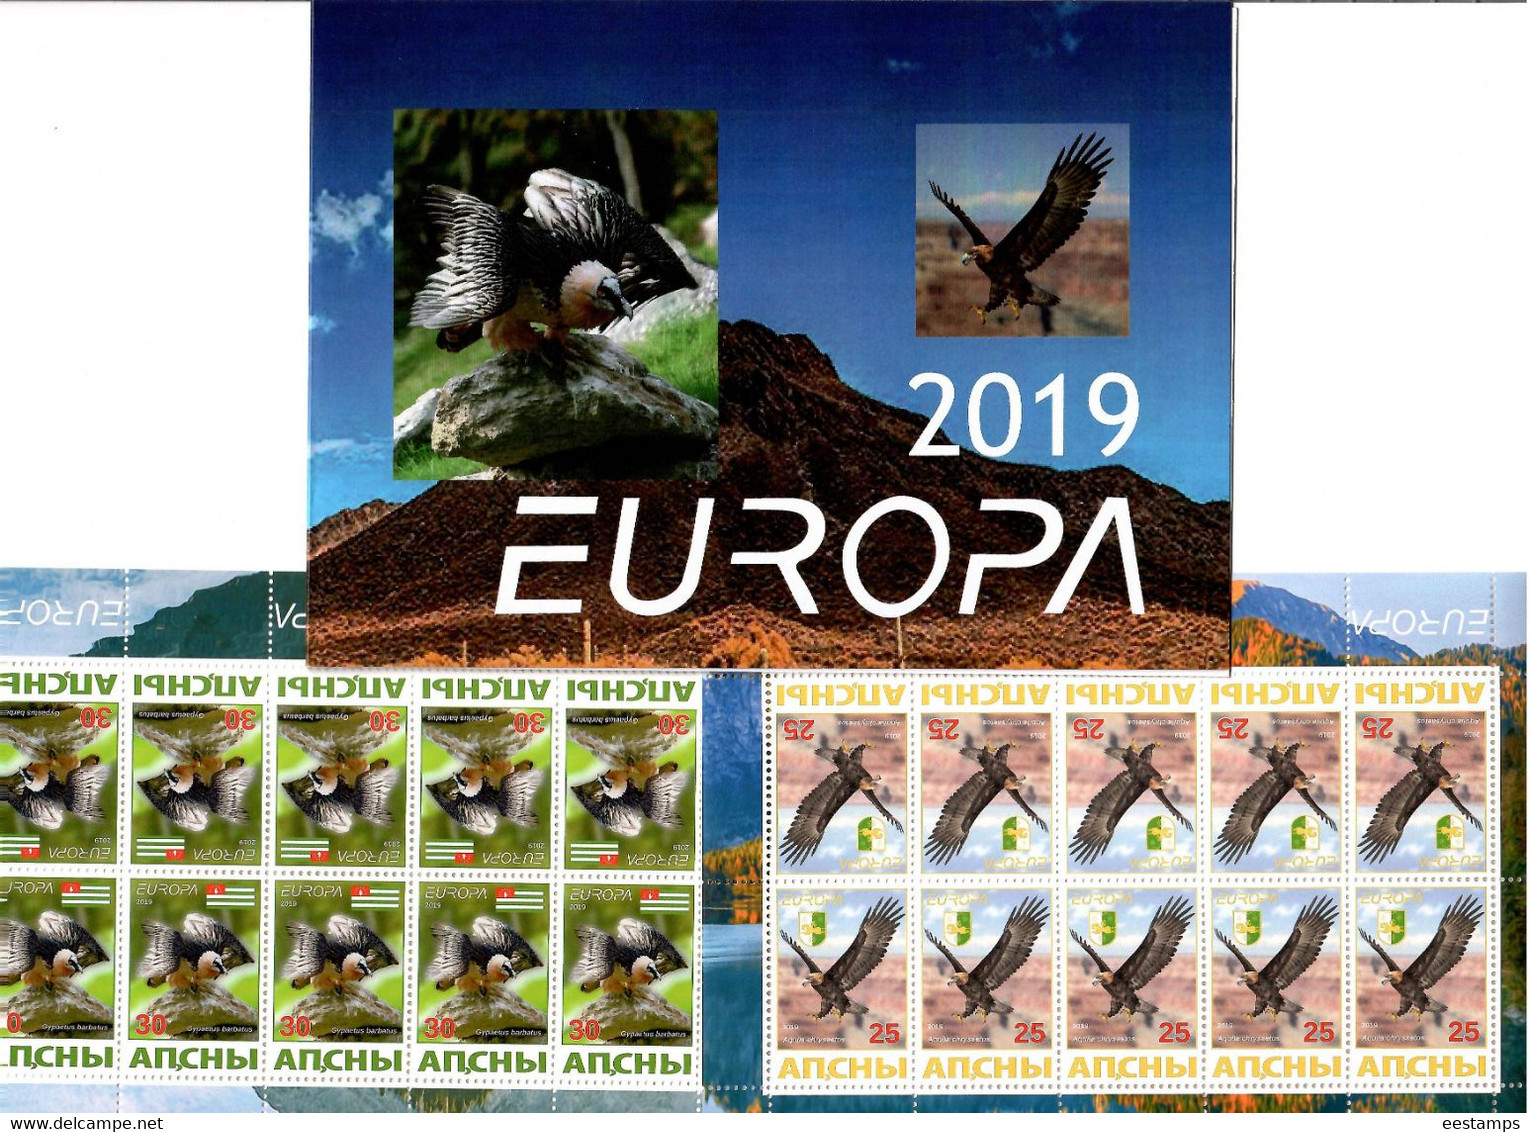 Abkhazia . EUROPA 2019. National Birds. (Arms,Flag) .Booklet 2 M/S Of 10 - 2019